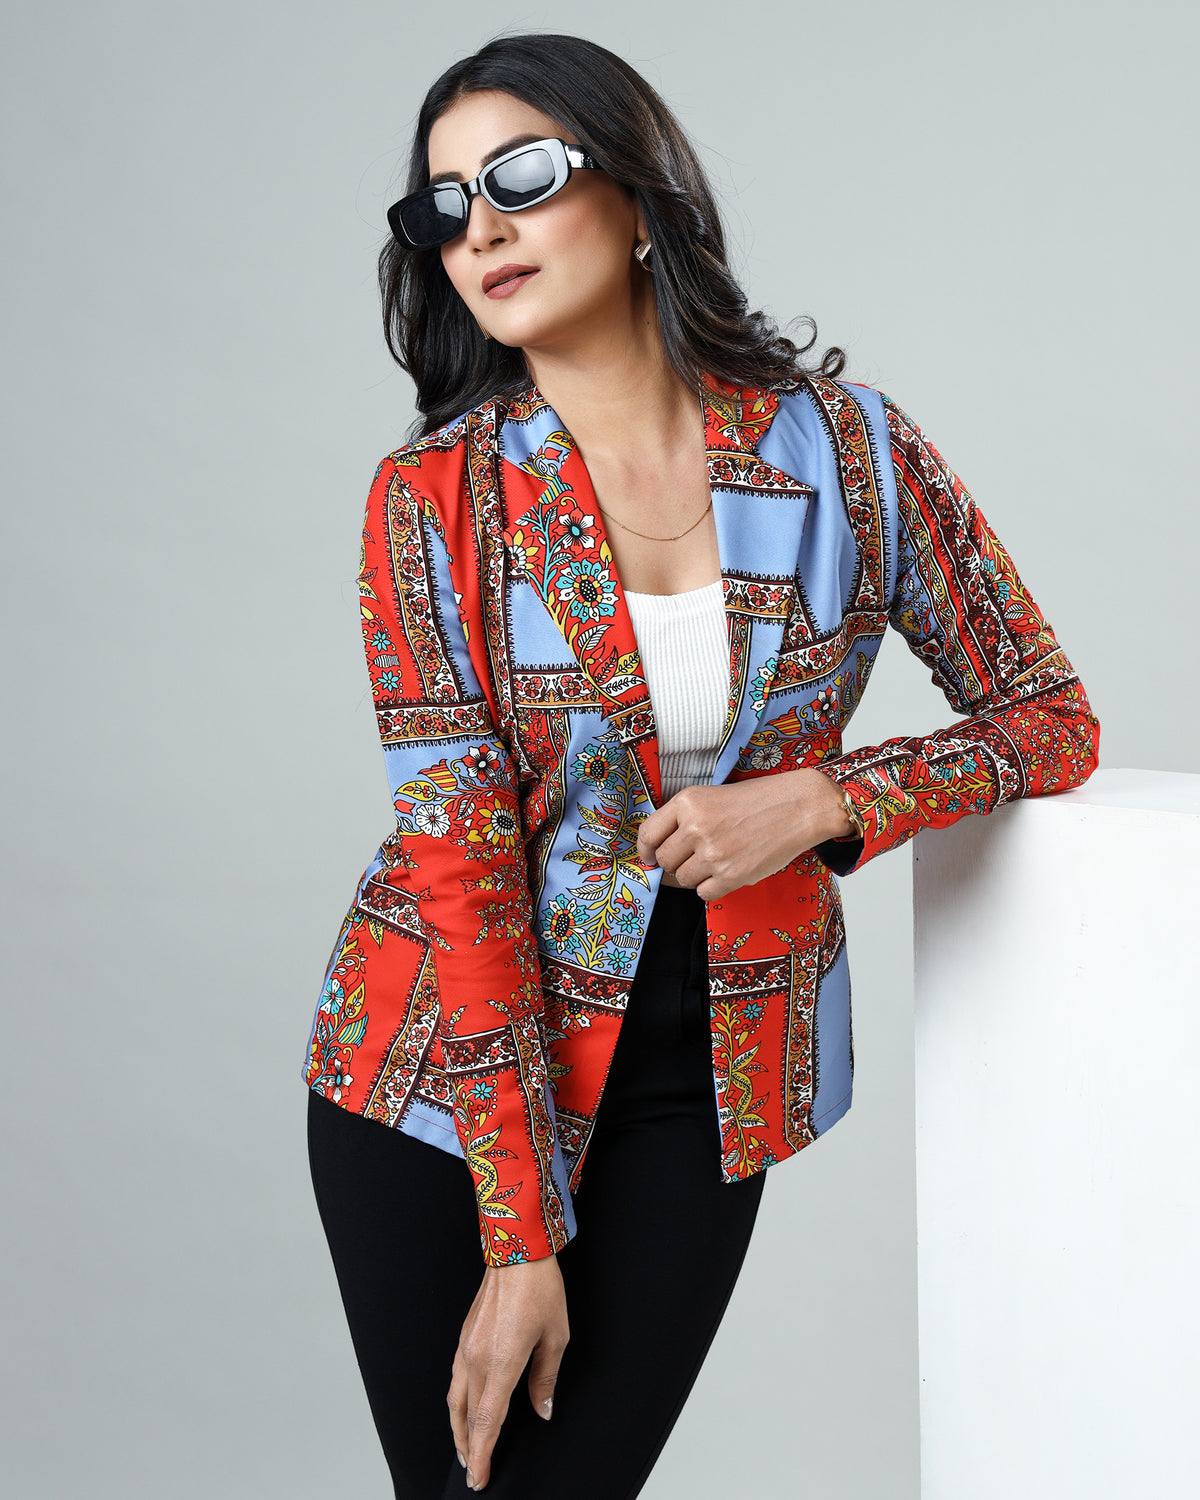 The Classic Bloom: Women's Floral Jacket